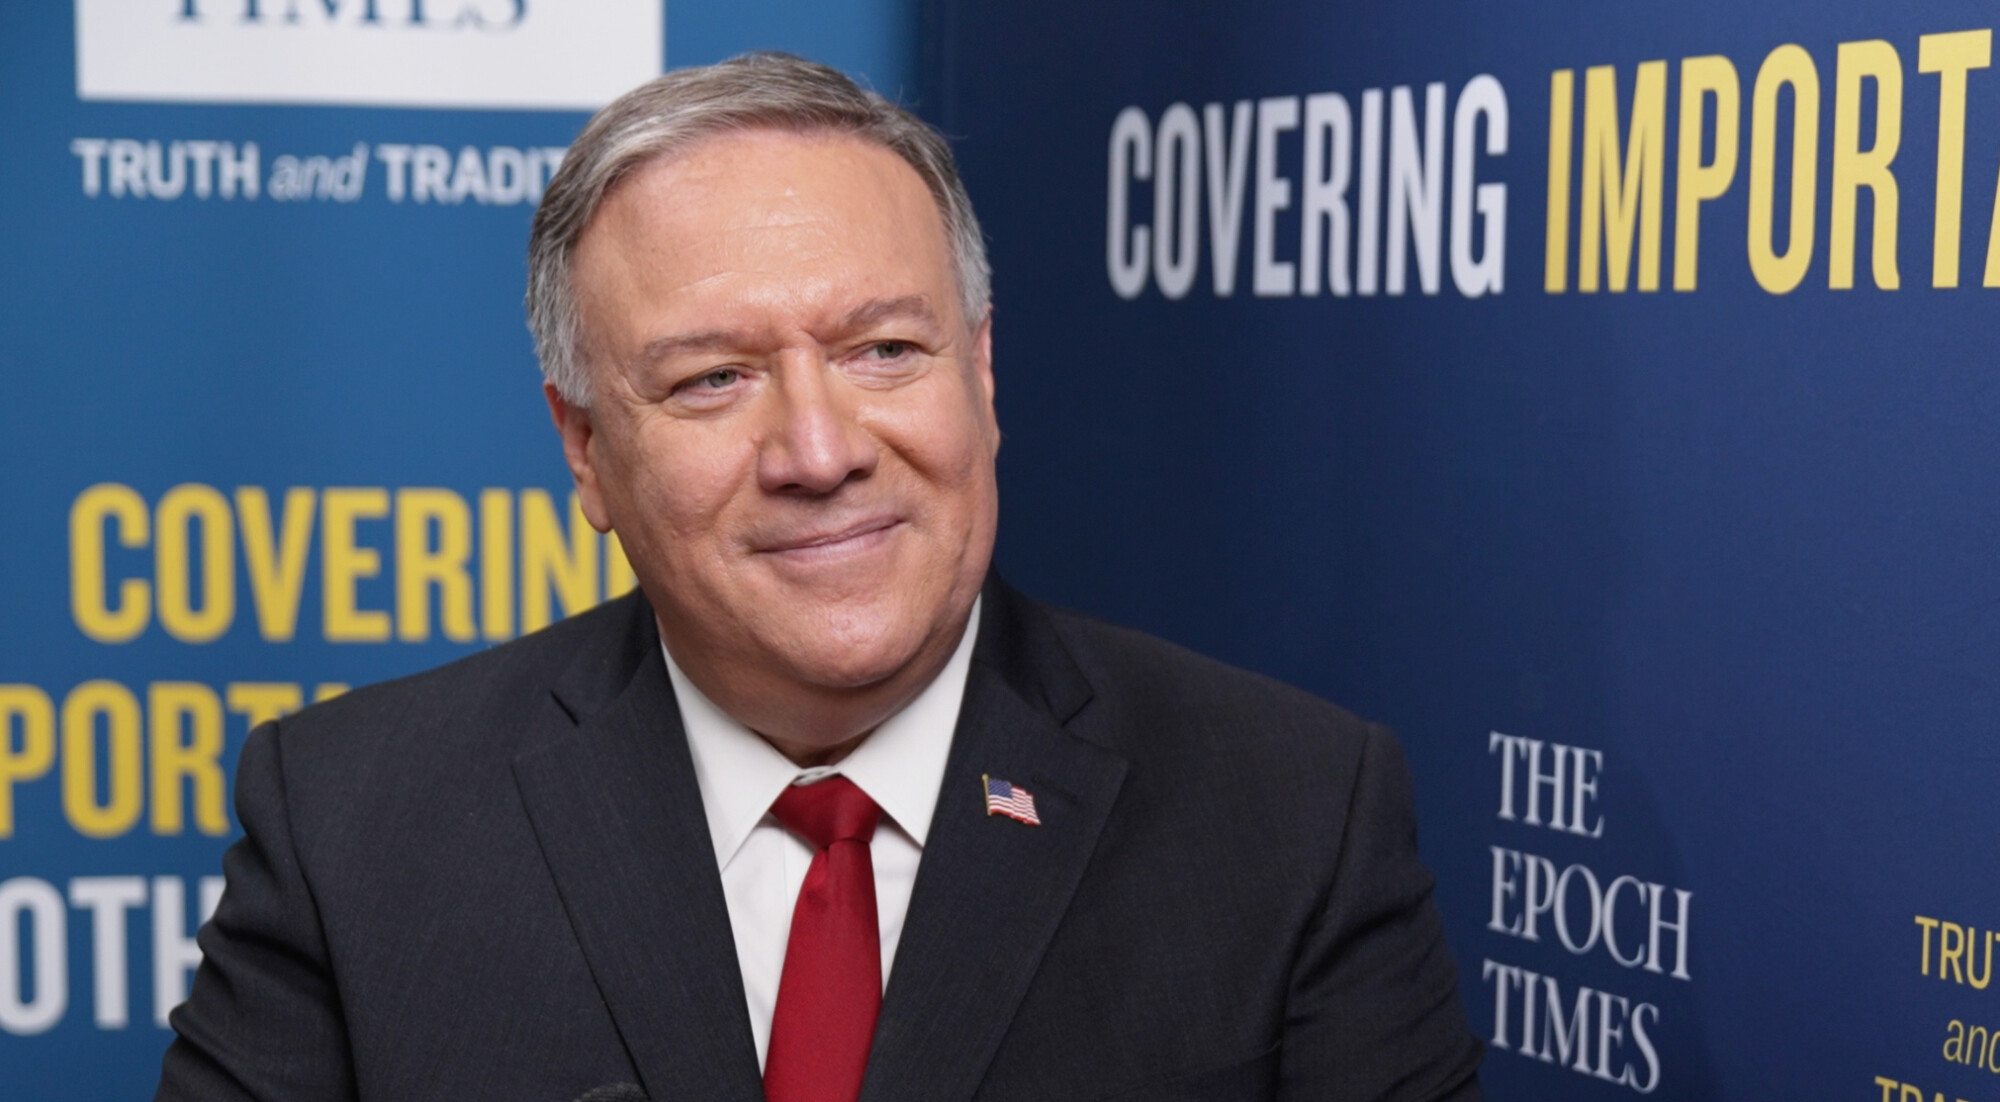 Video: Mike Pompeo: Trump Administration Exposed ‘Irrefutable’ Facts on China